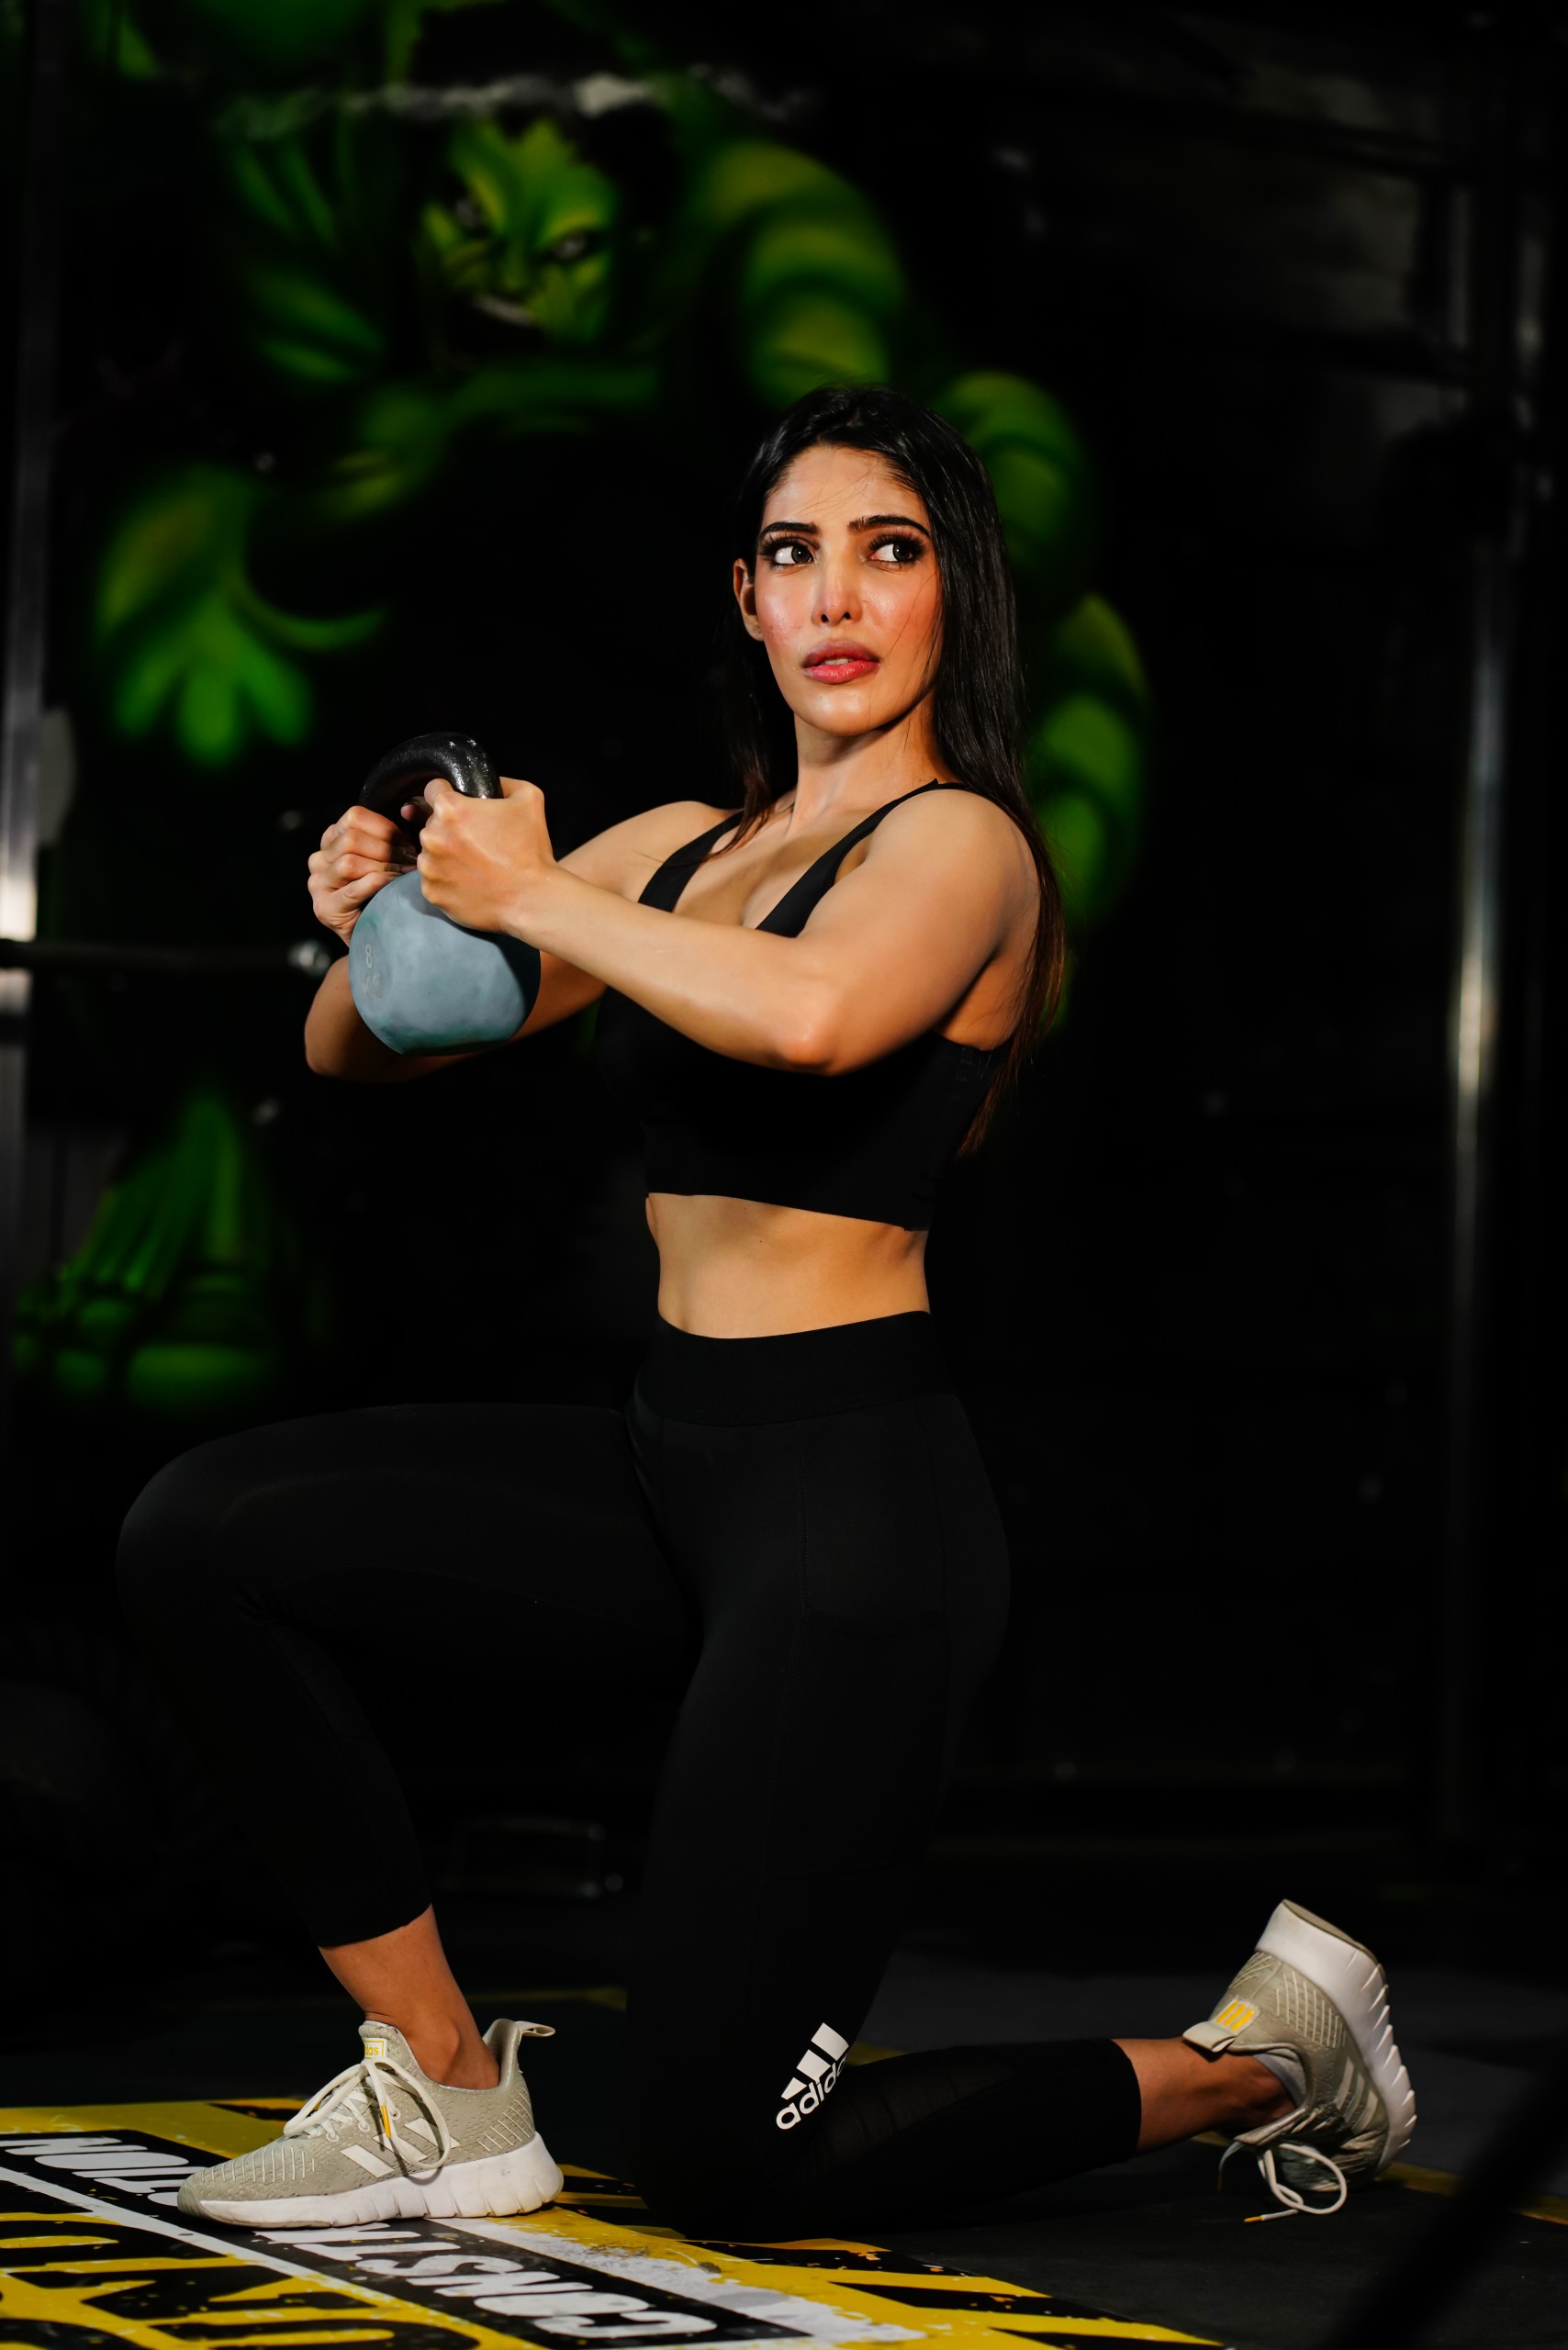 Female working out in gym with Kettlebell